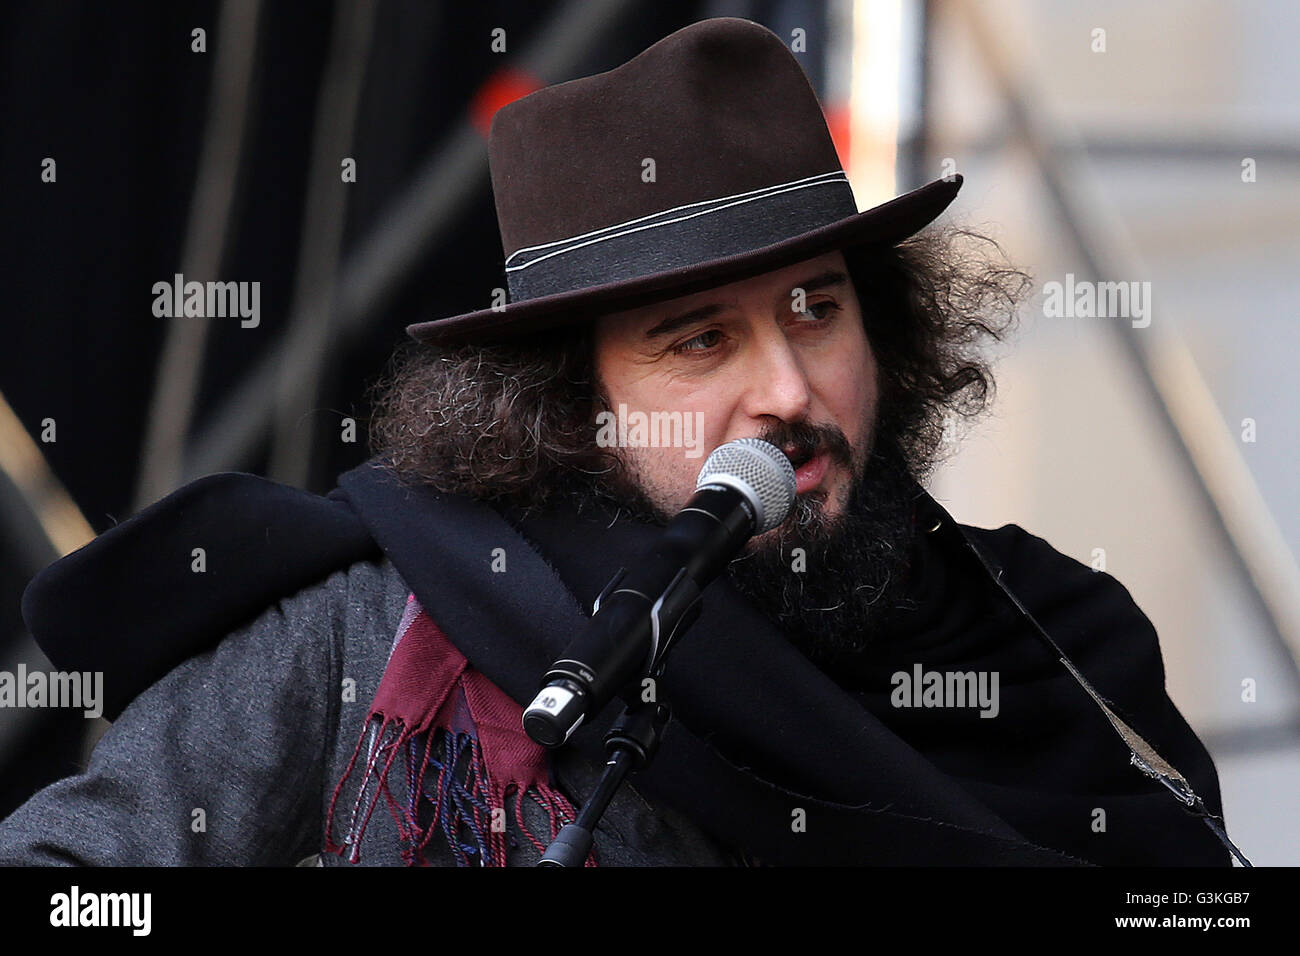 The singer Vinicio Capossela during rehearsals in San Carlo Square in Turin for New Year's concert. Vinicio Capossela is an Italian singer-songwriter. His style is strongly influenced by US singer and songwriter Tom Waits, though it also draws from the traditions of Italian folk music. Stock Photo